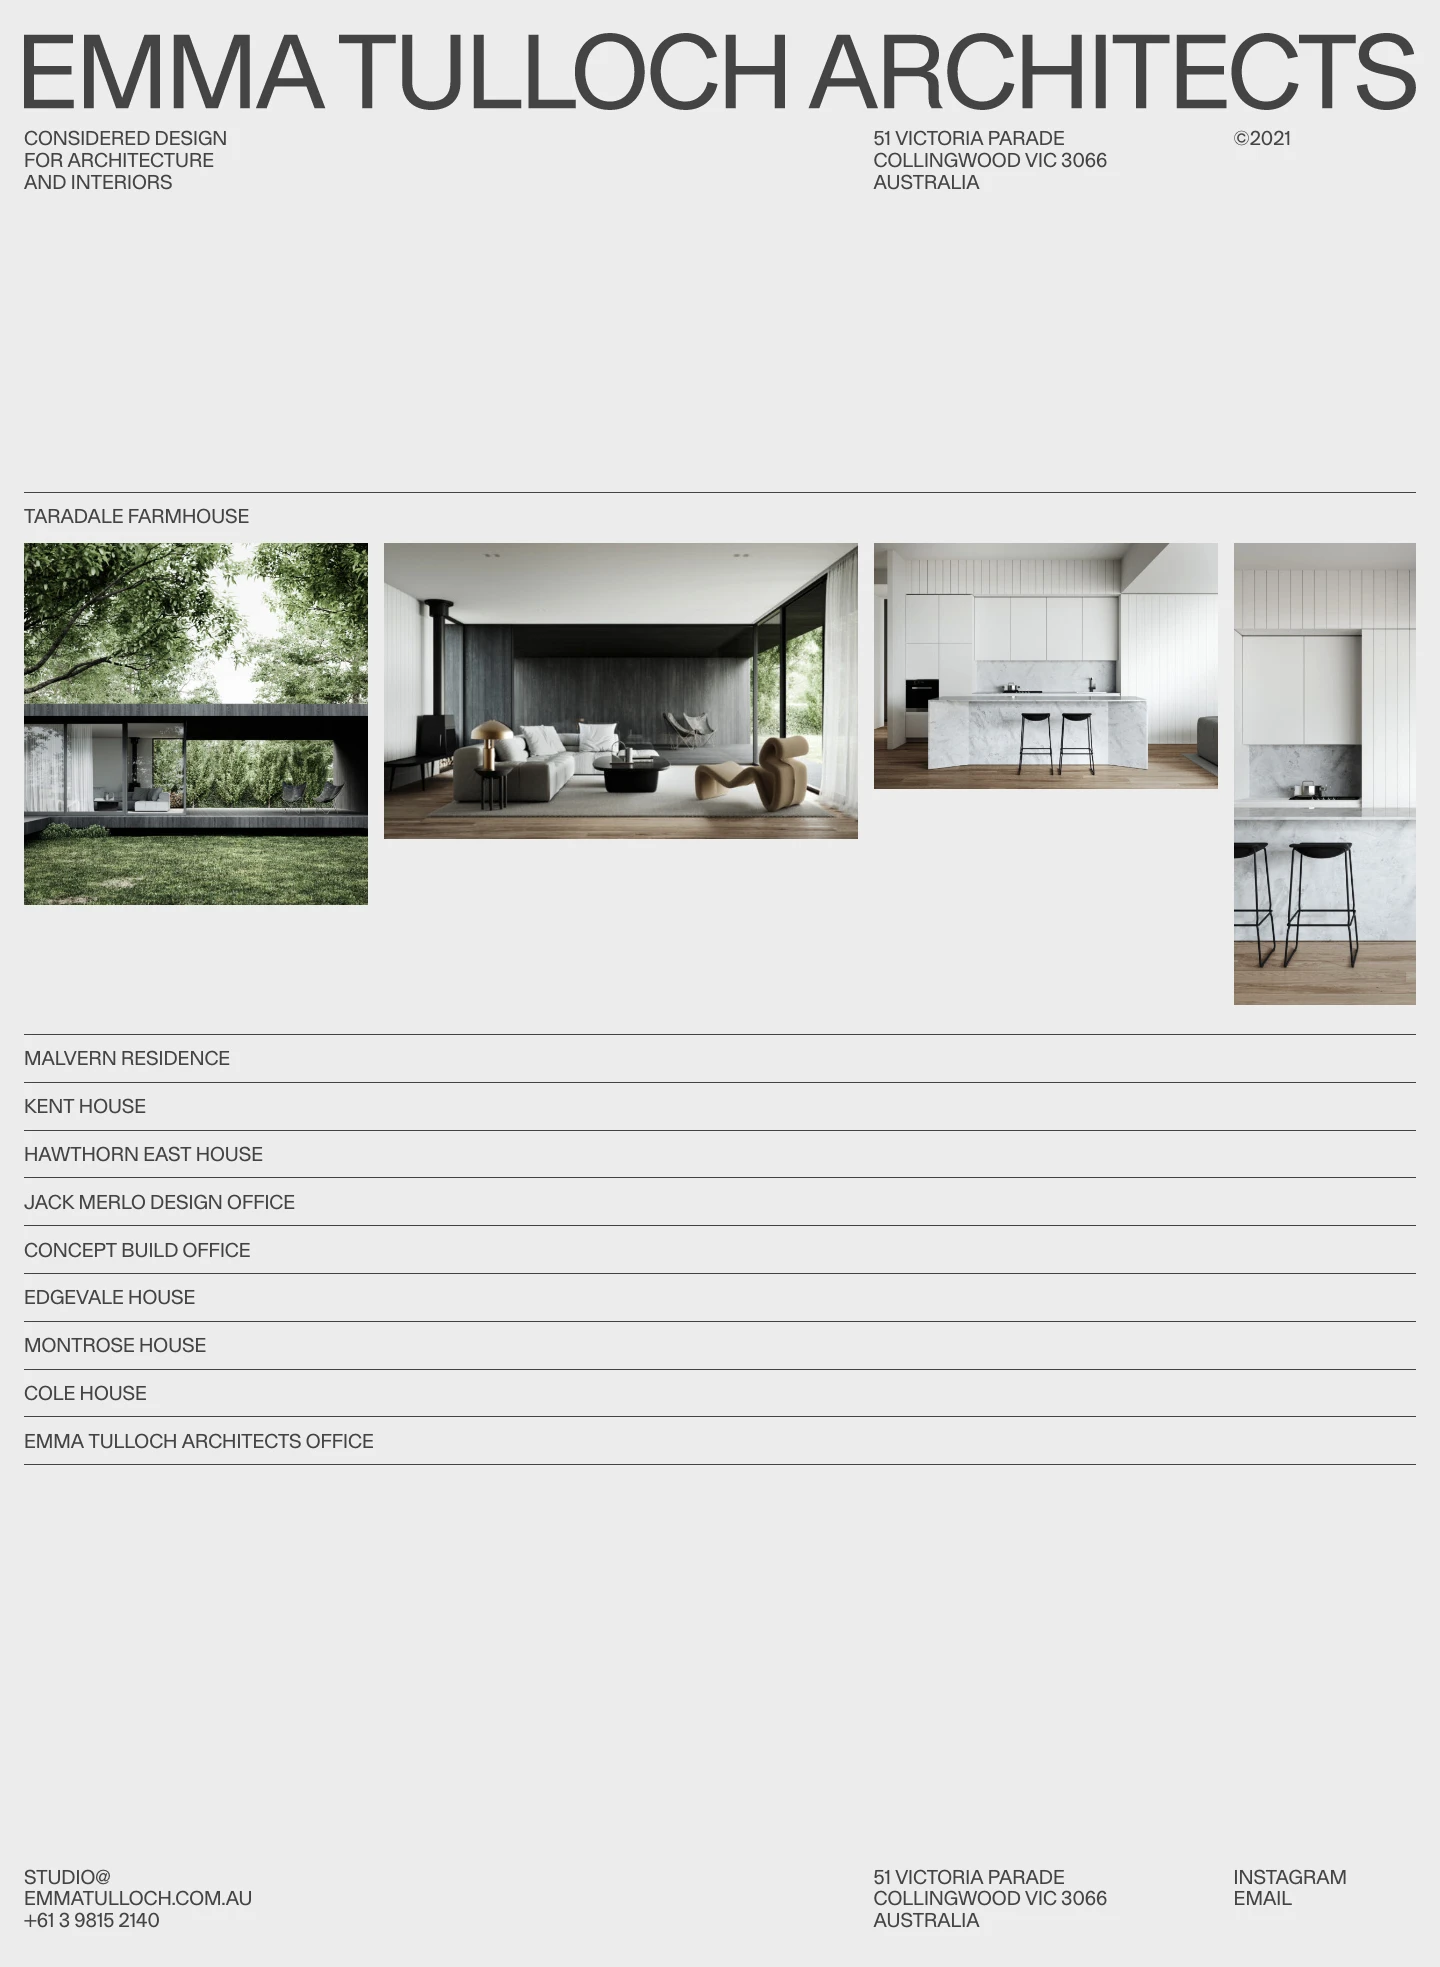 Emma Tulloch Architects Landing Page Example: Emma Tulloch Architects is a boutique architectural office located in the heart of Melbourne.